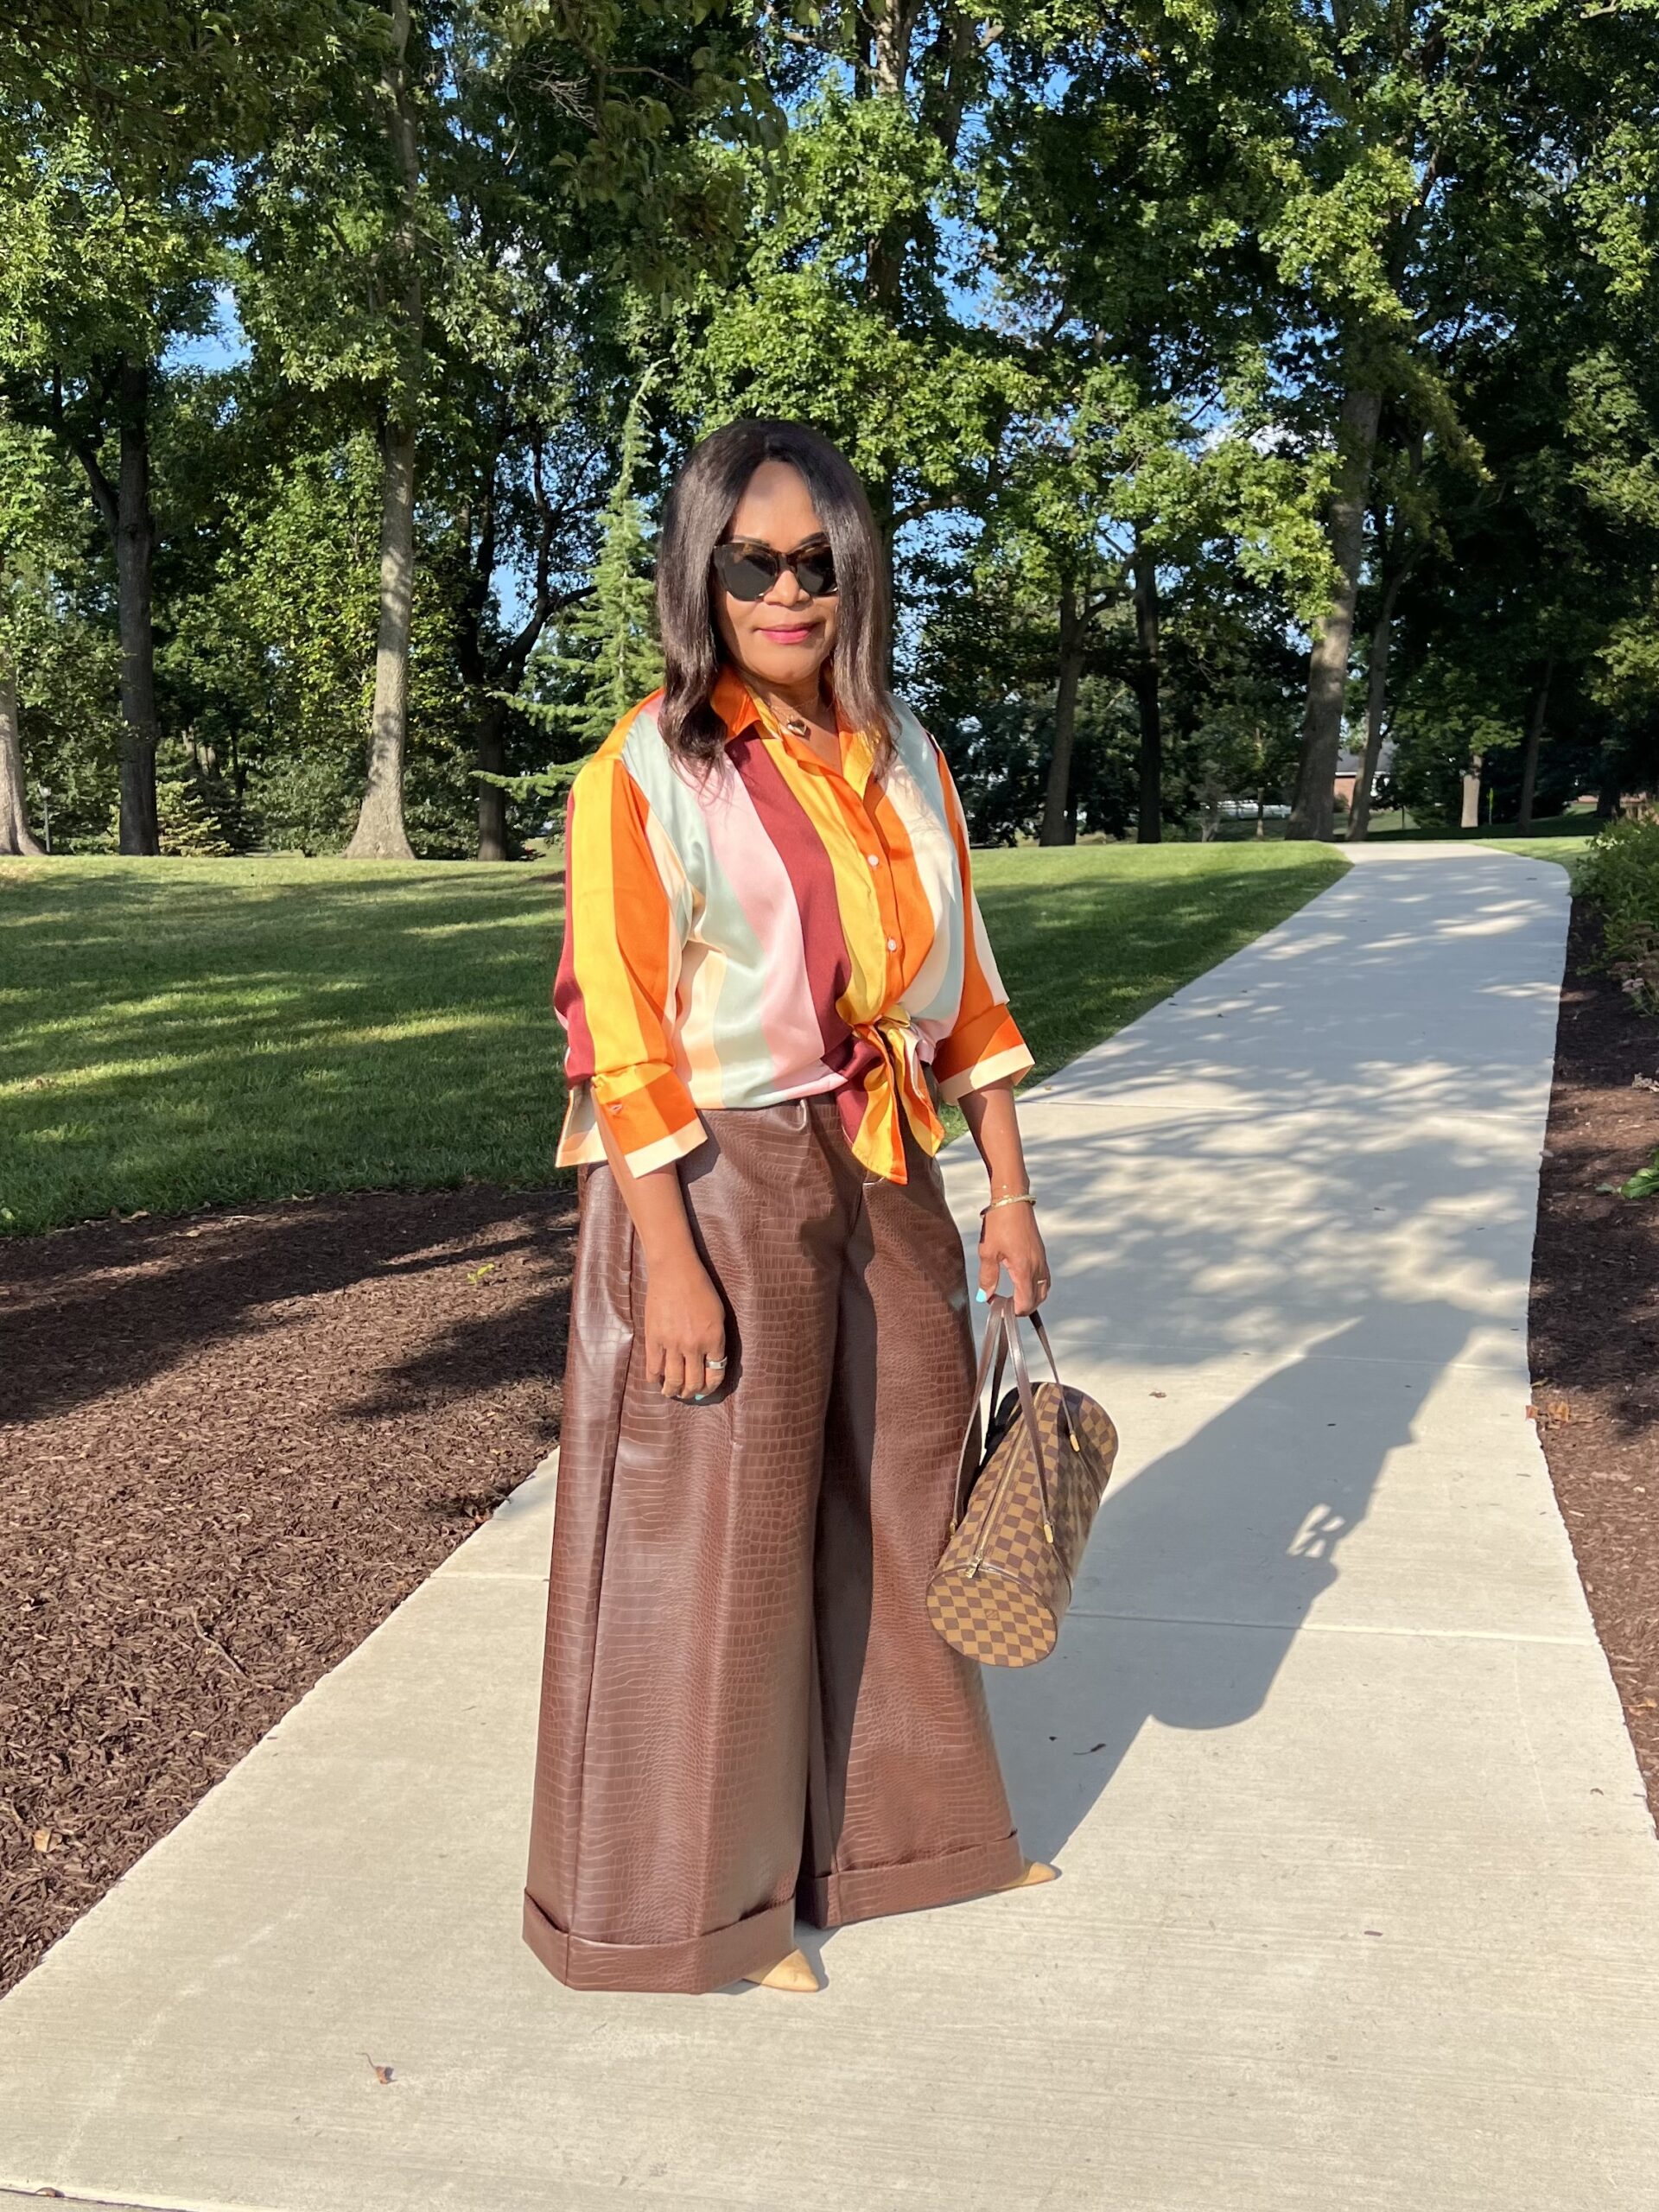 I shopped my closet for Fe Noel x Target Stripe Blouse and Kai Collective Croc Faux Leather Wide-leg Trousers since fall us knocking at our door.